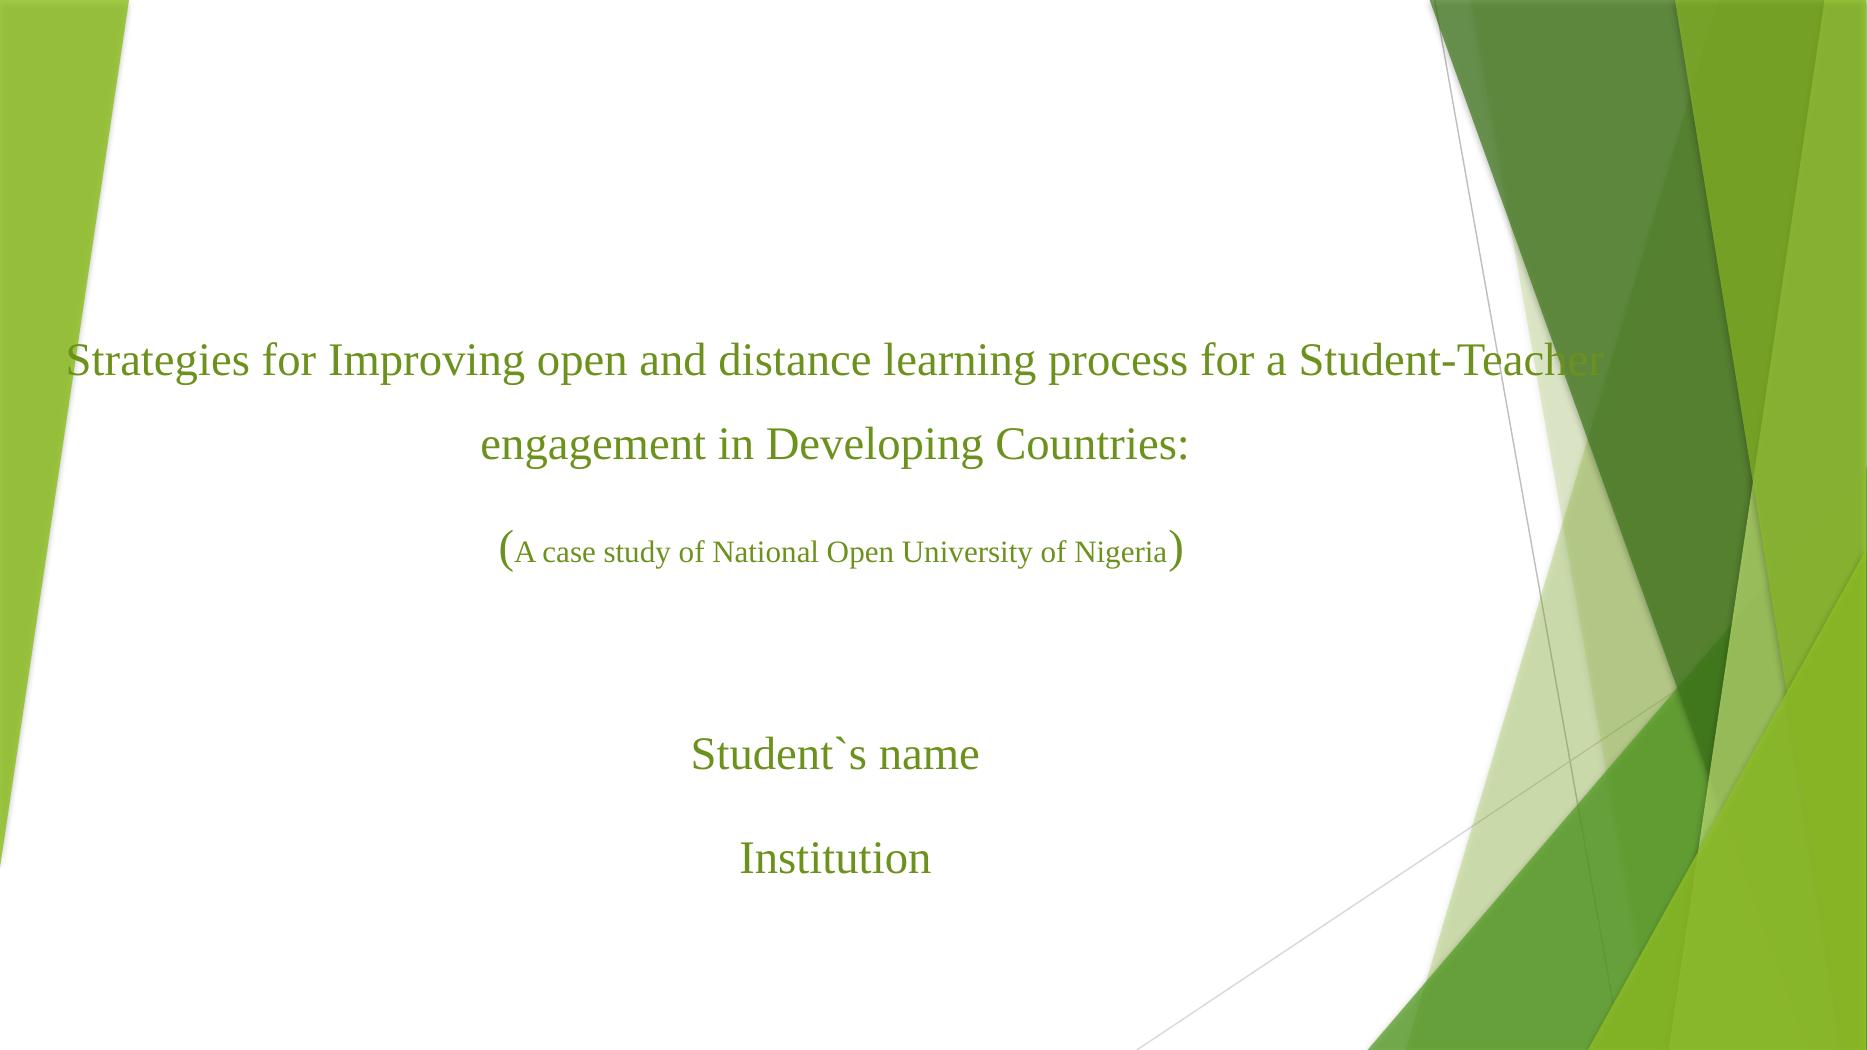 Strategies for Improving Open and Distance Learning Process for Student-Teacher Engagement in Developing Countries_1